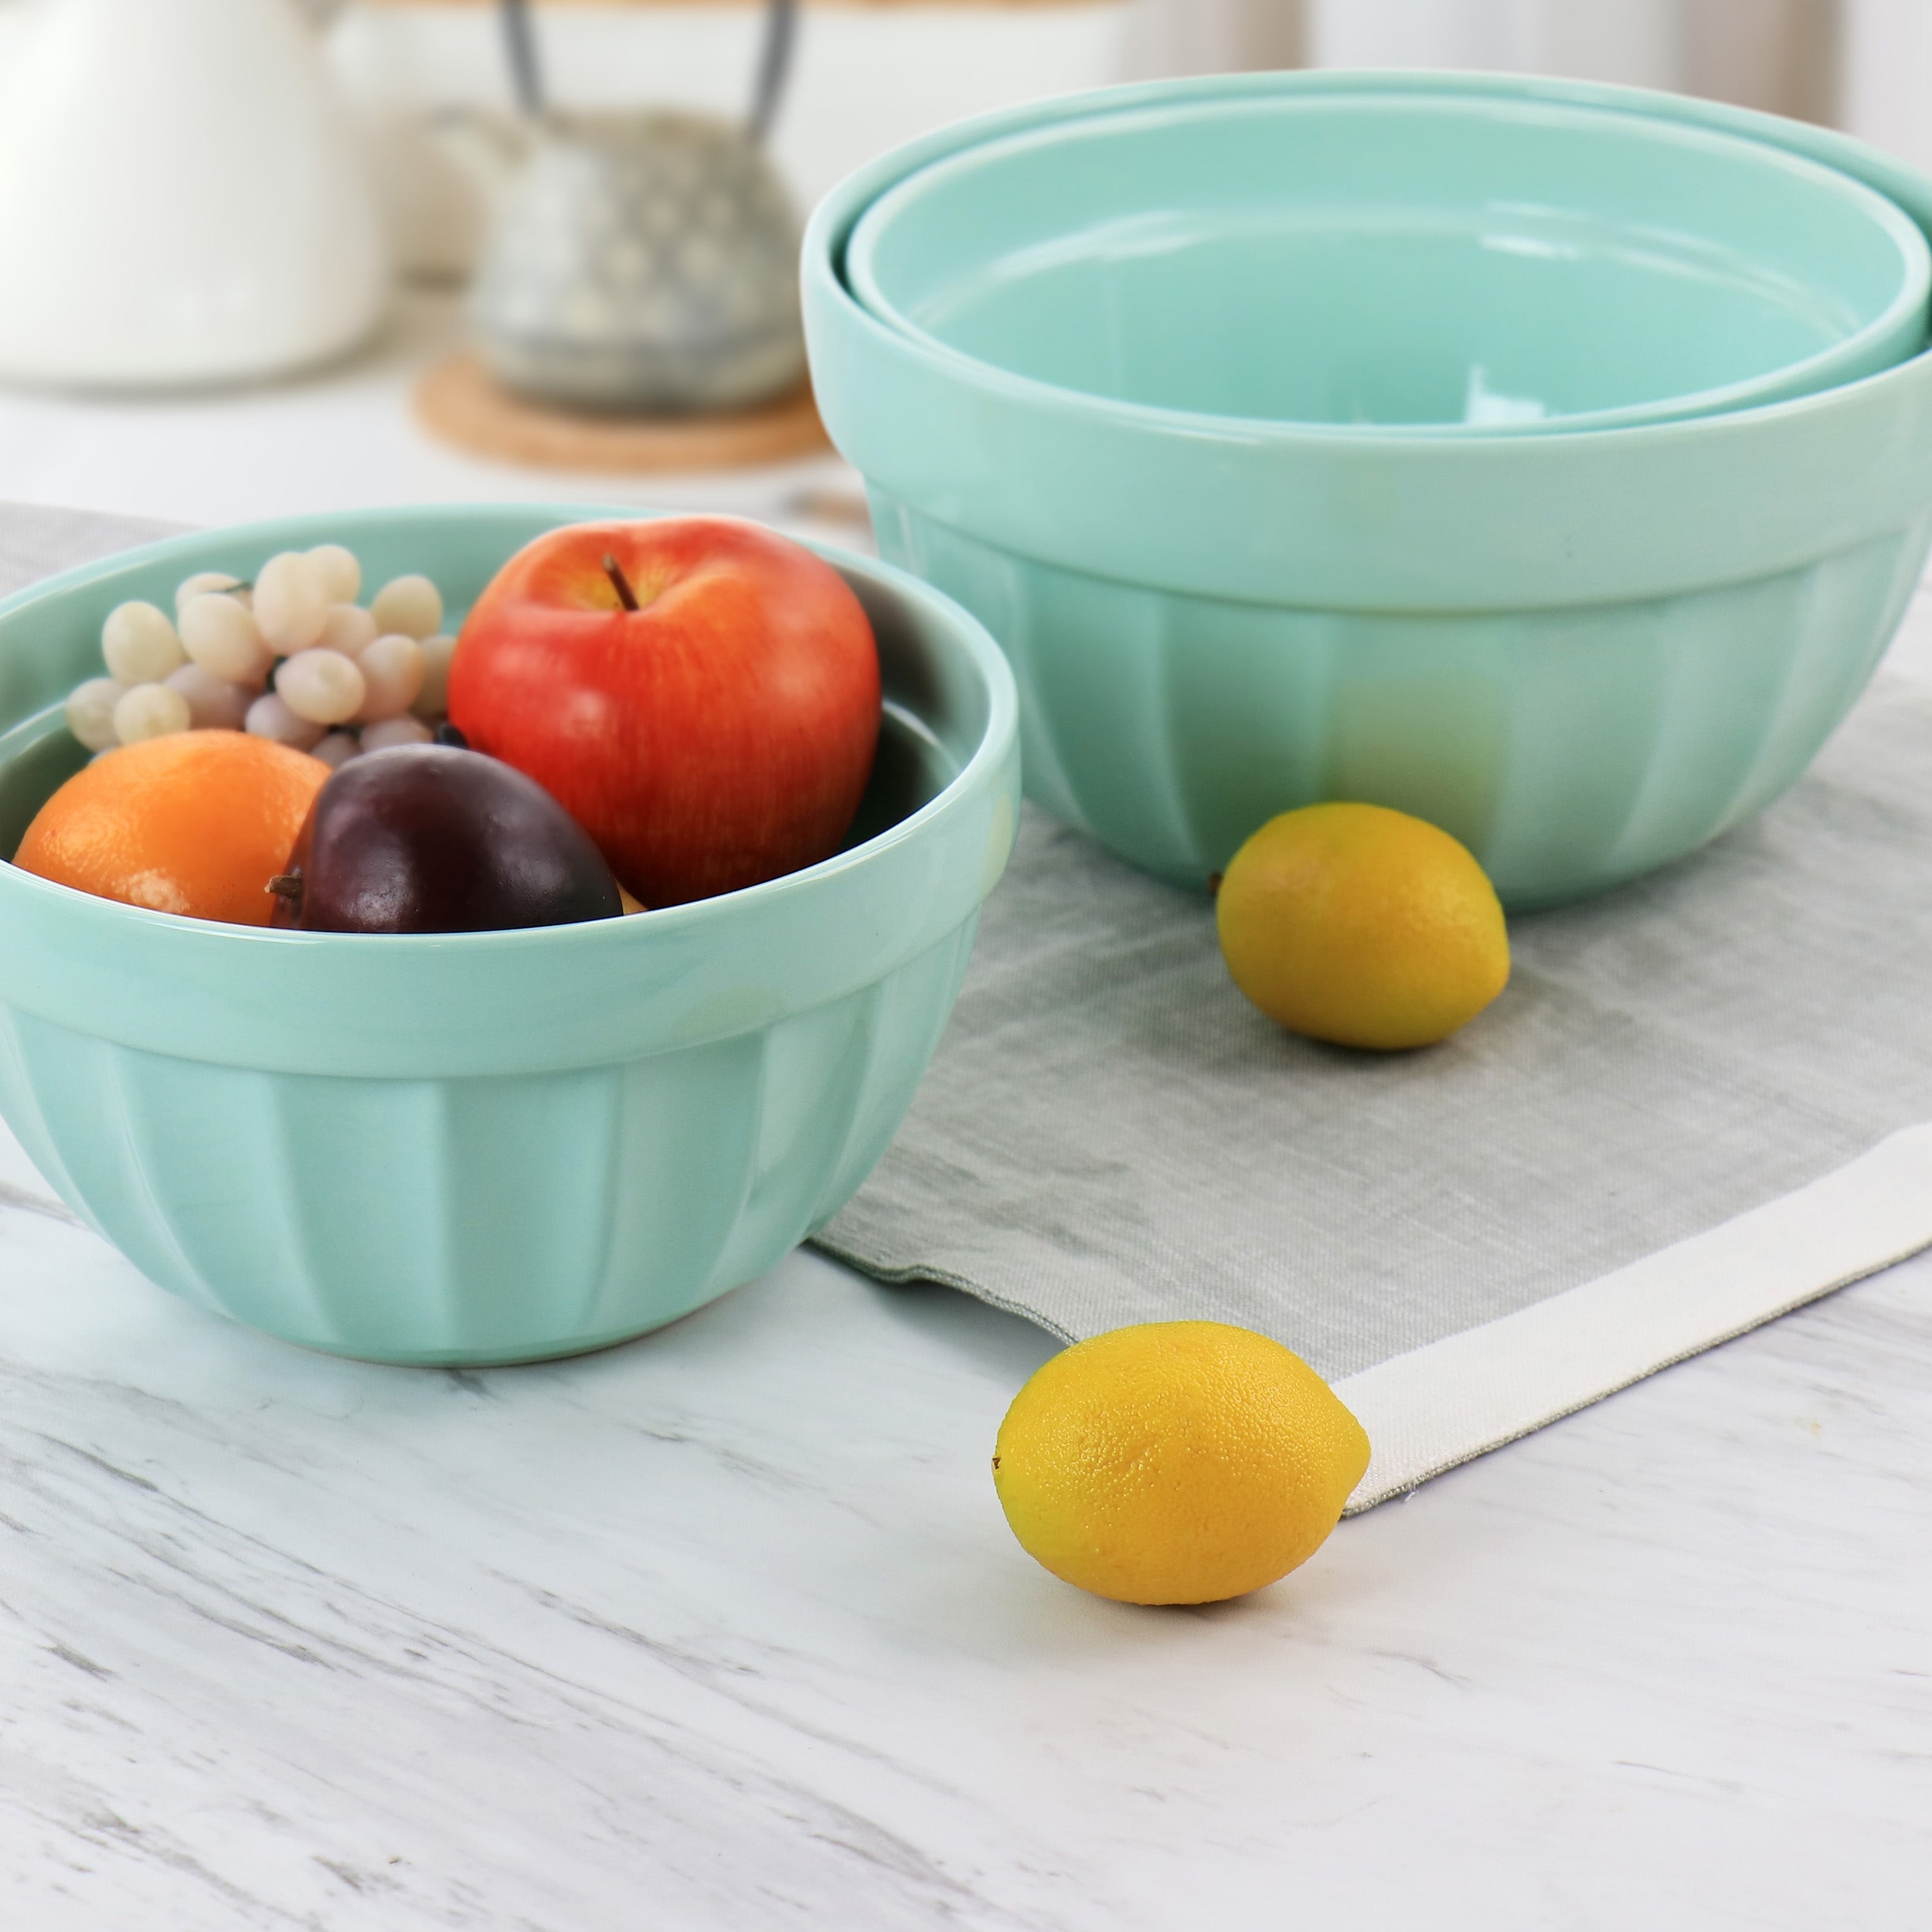 https://ak1.ostkcdn.com/images/products/is/images/direct/90e0358534d7288cdd1a9feb612f4a1bbf40e770/Martha-Stewart-3-Piece-Stoneware-Bowl-Set-in-Mint.jpg